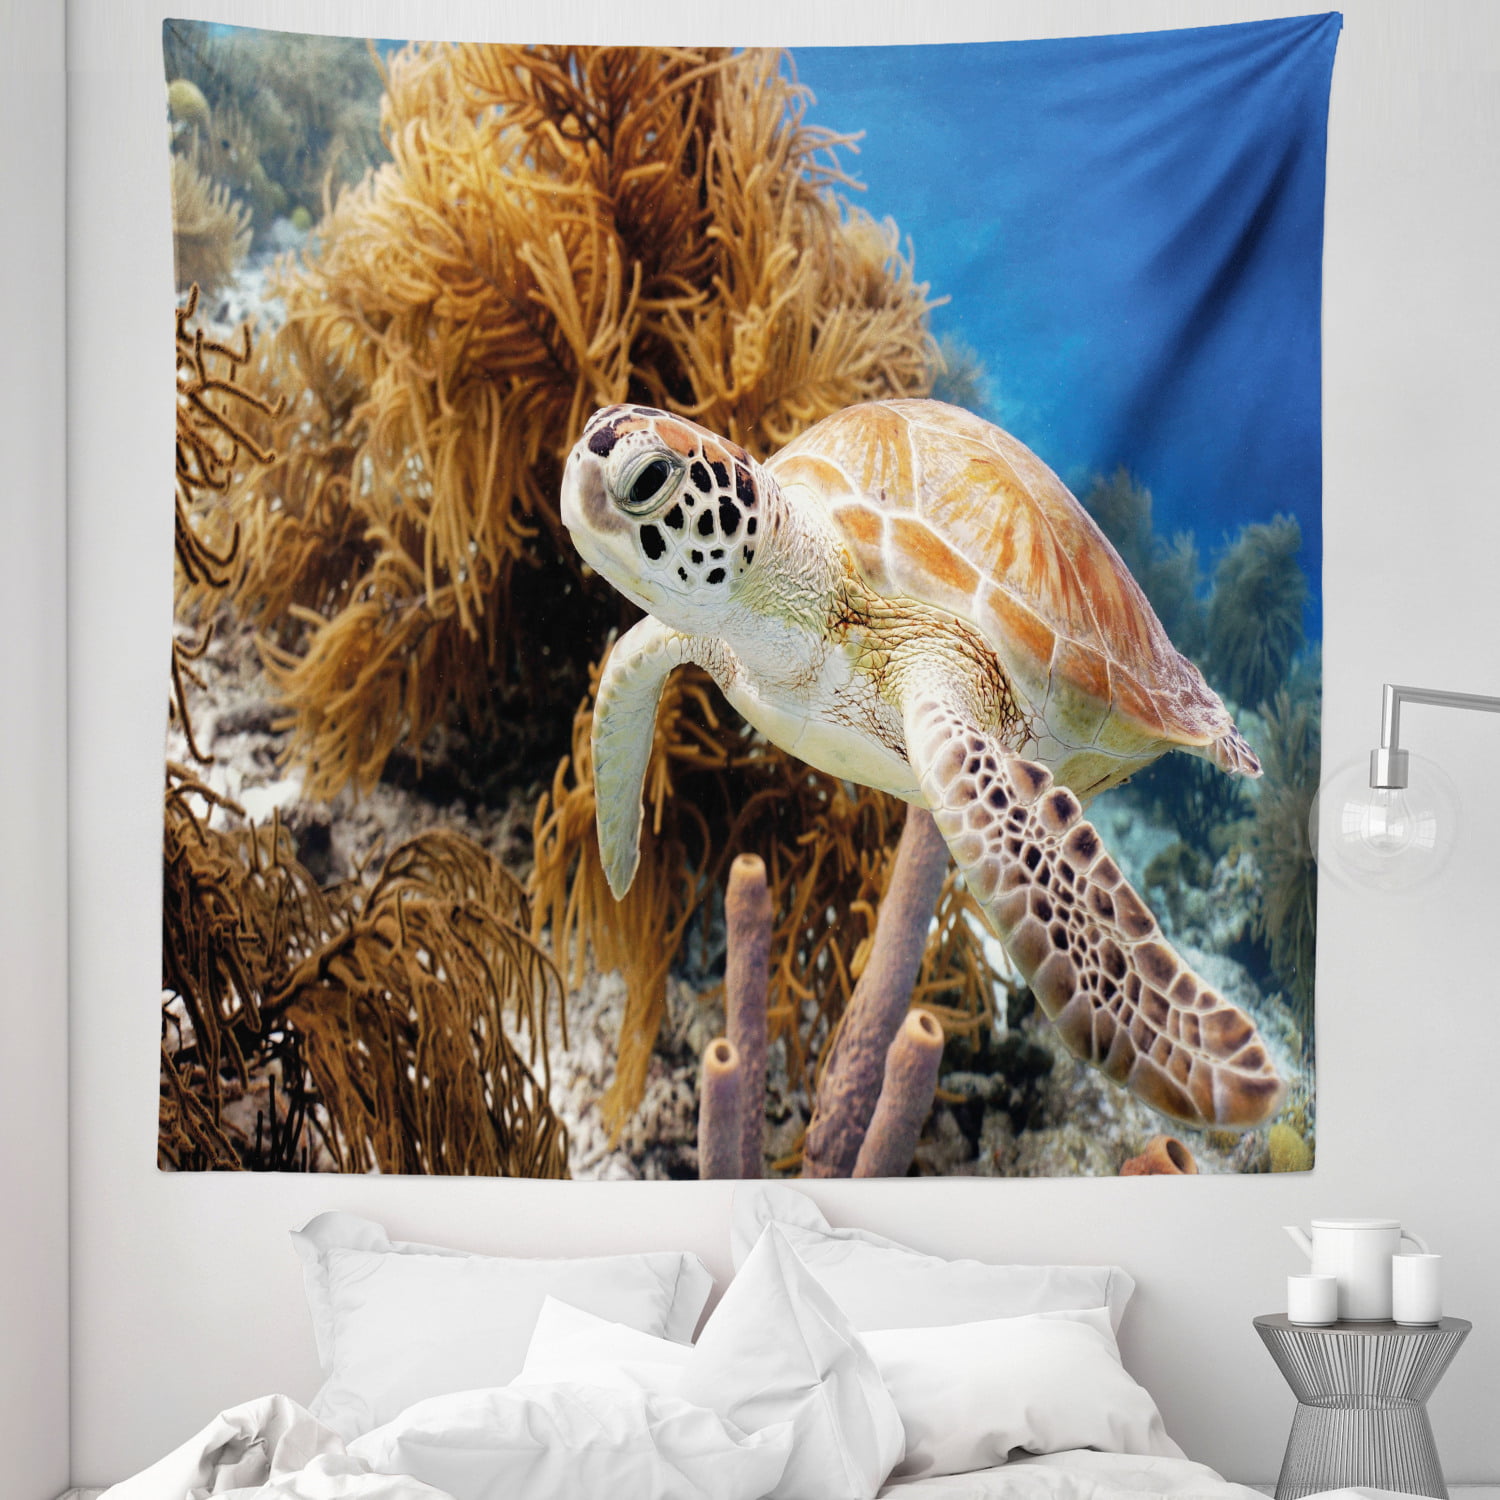 Turtle Tapestry, Coral Reef and Sea Turtle Close up Photo Bonaire Island  Waters Maritime, Fabric Wall Hanging Decor for Bedroom Living Room Dorm, 5  